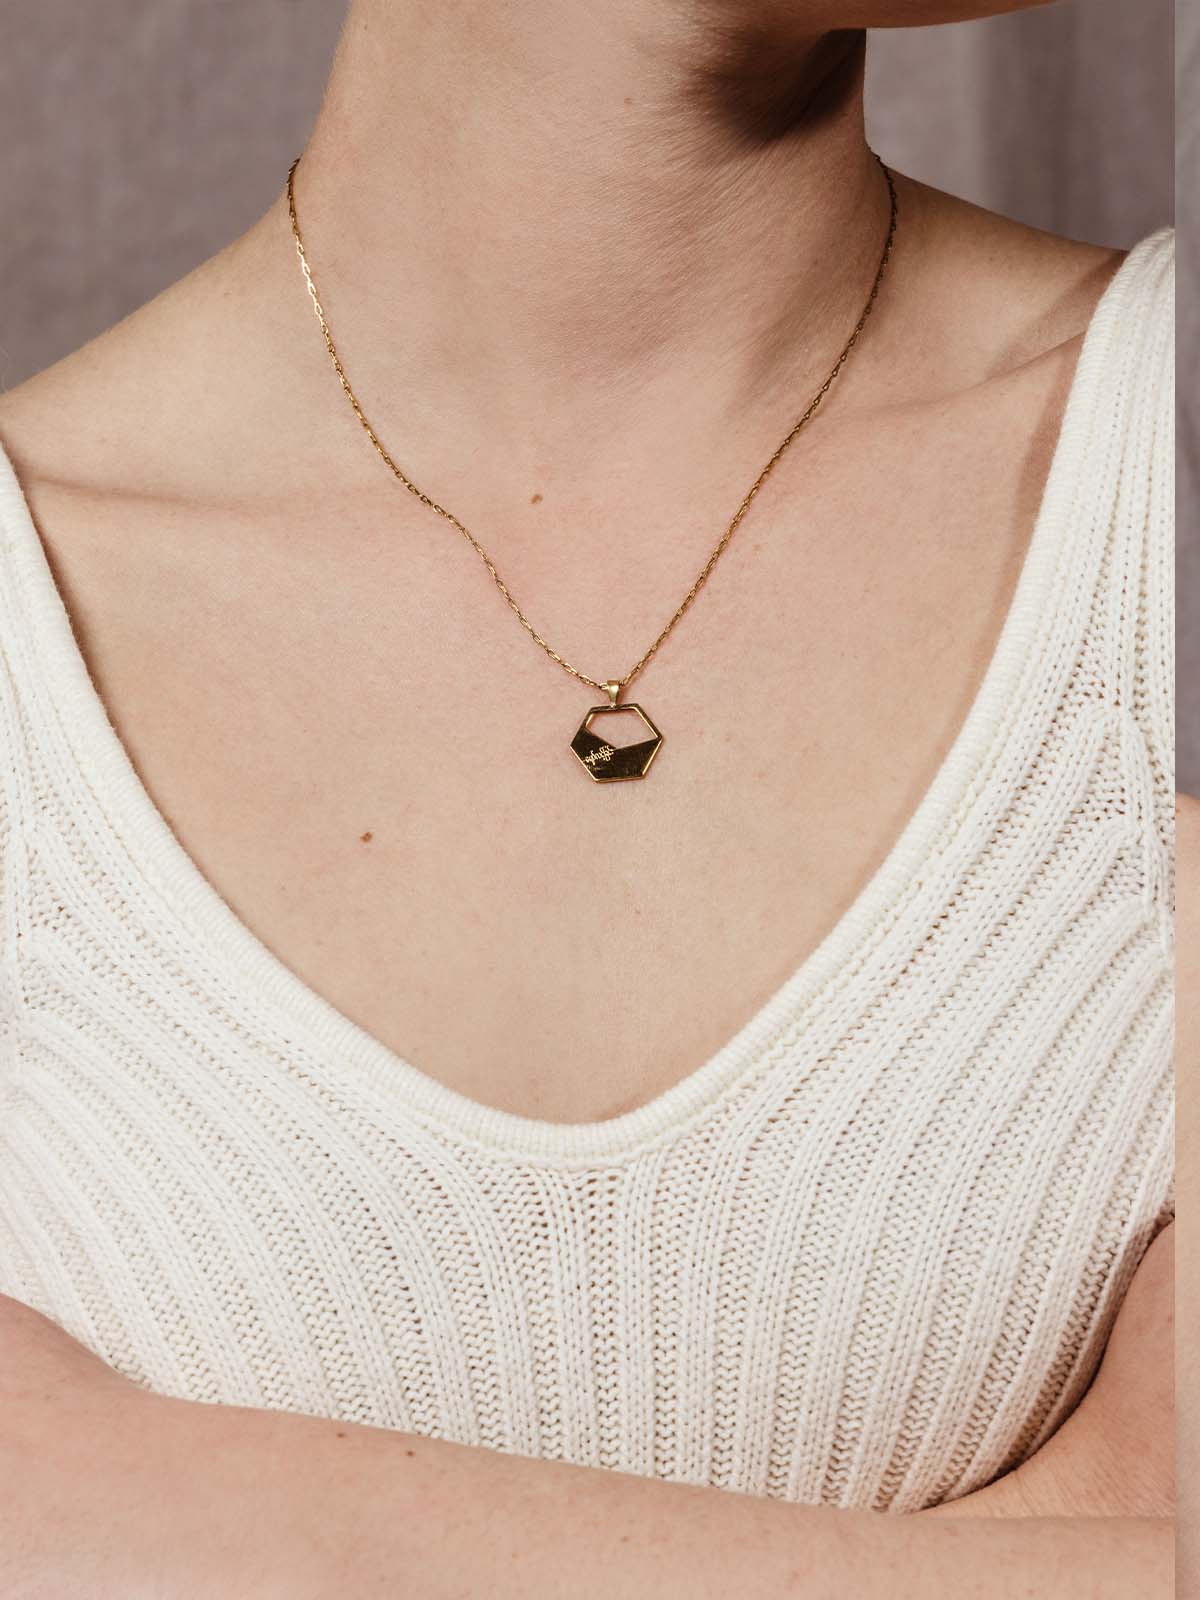 Geometric gold necklace on a model wearing white knit tank top. 